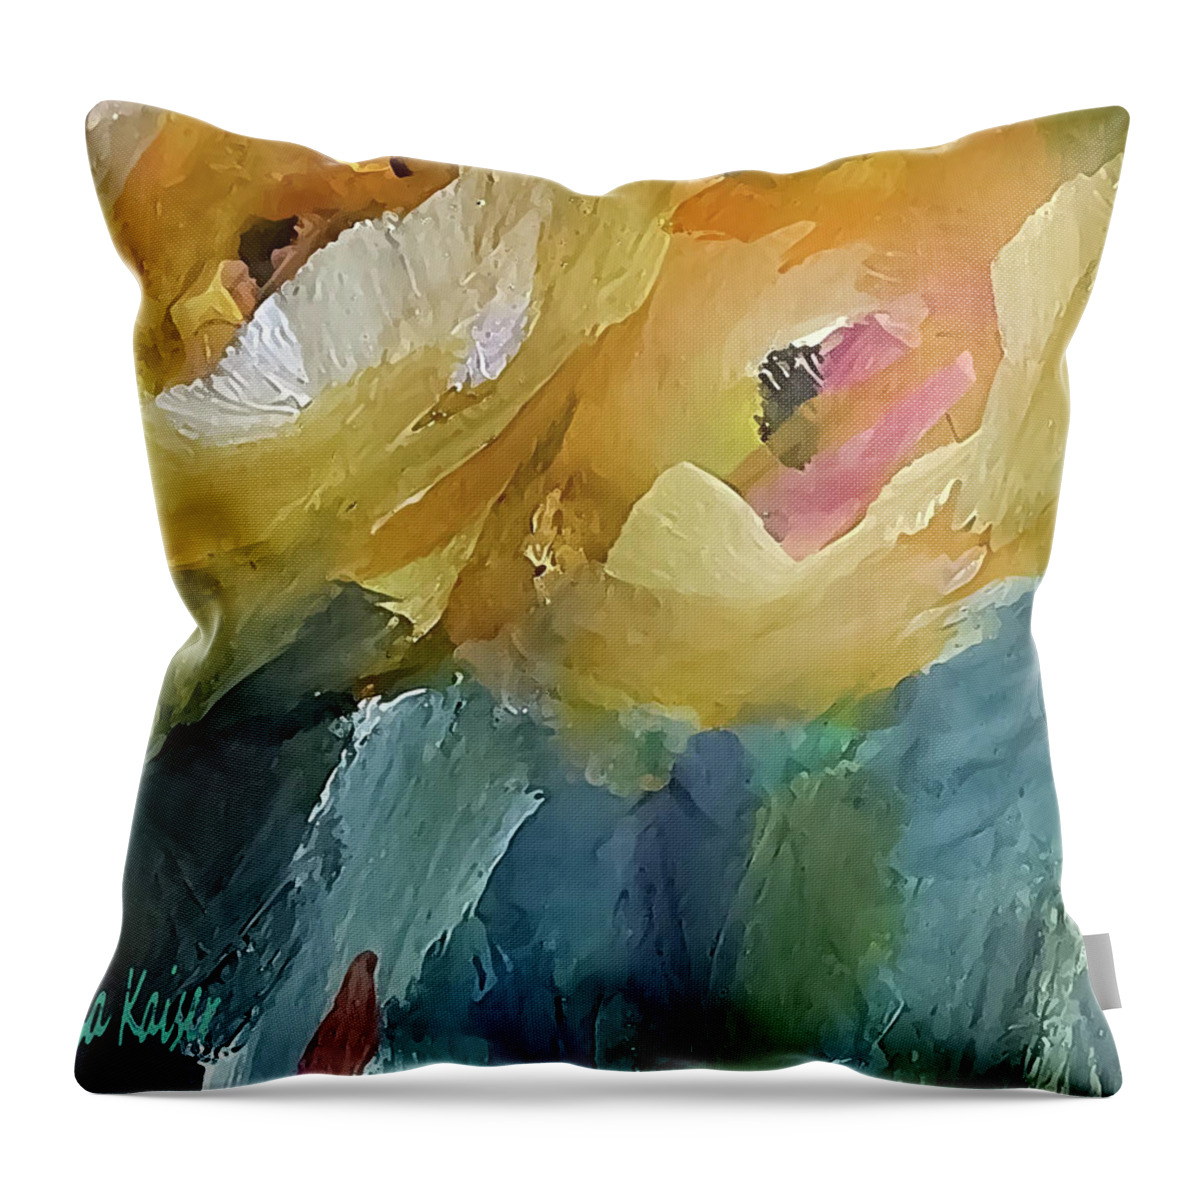 Impressionistic Throw Pillow featuring the painting Two Small Yellow Flowers Looking Upward by Lisa Kaiser